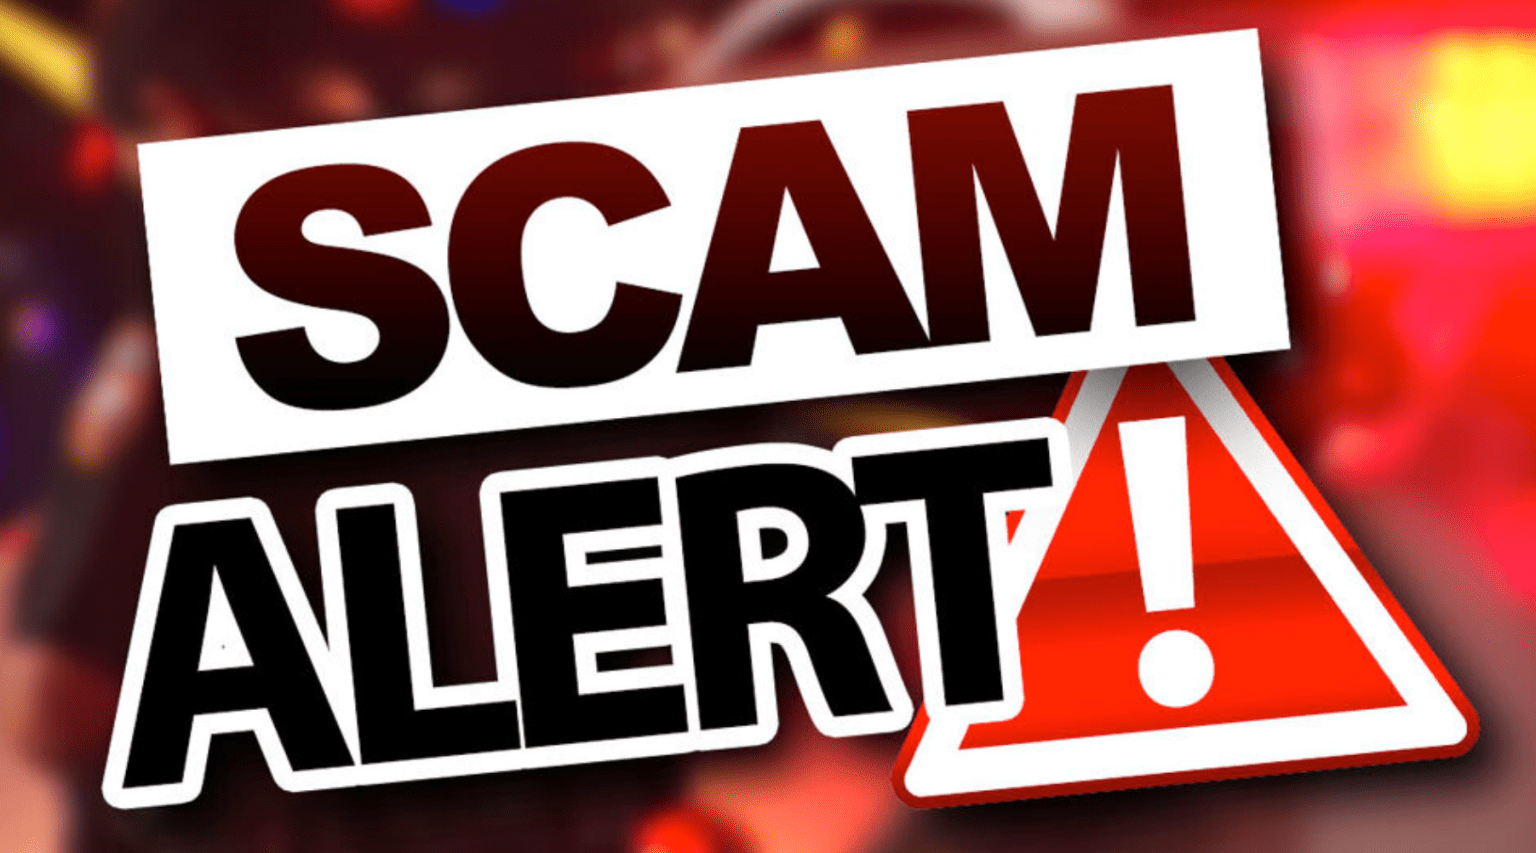 trussville-chamber-and-church-partner-to-host-scam-alert-seminar-the